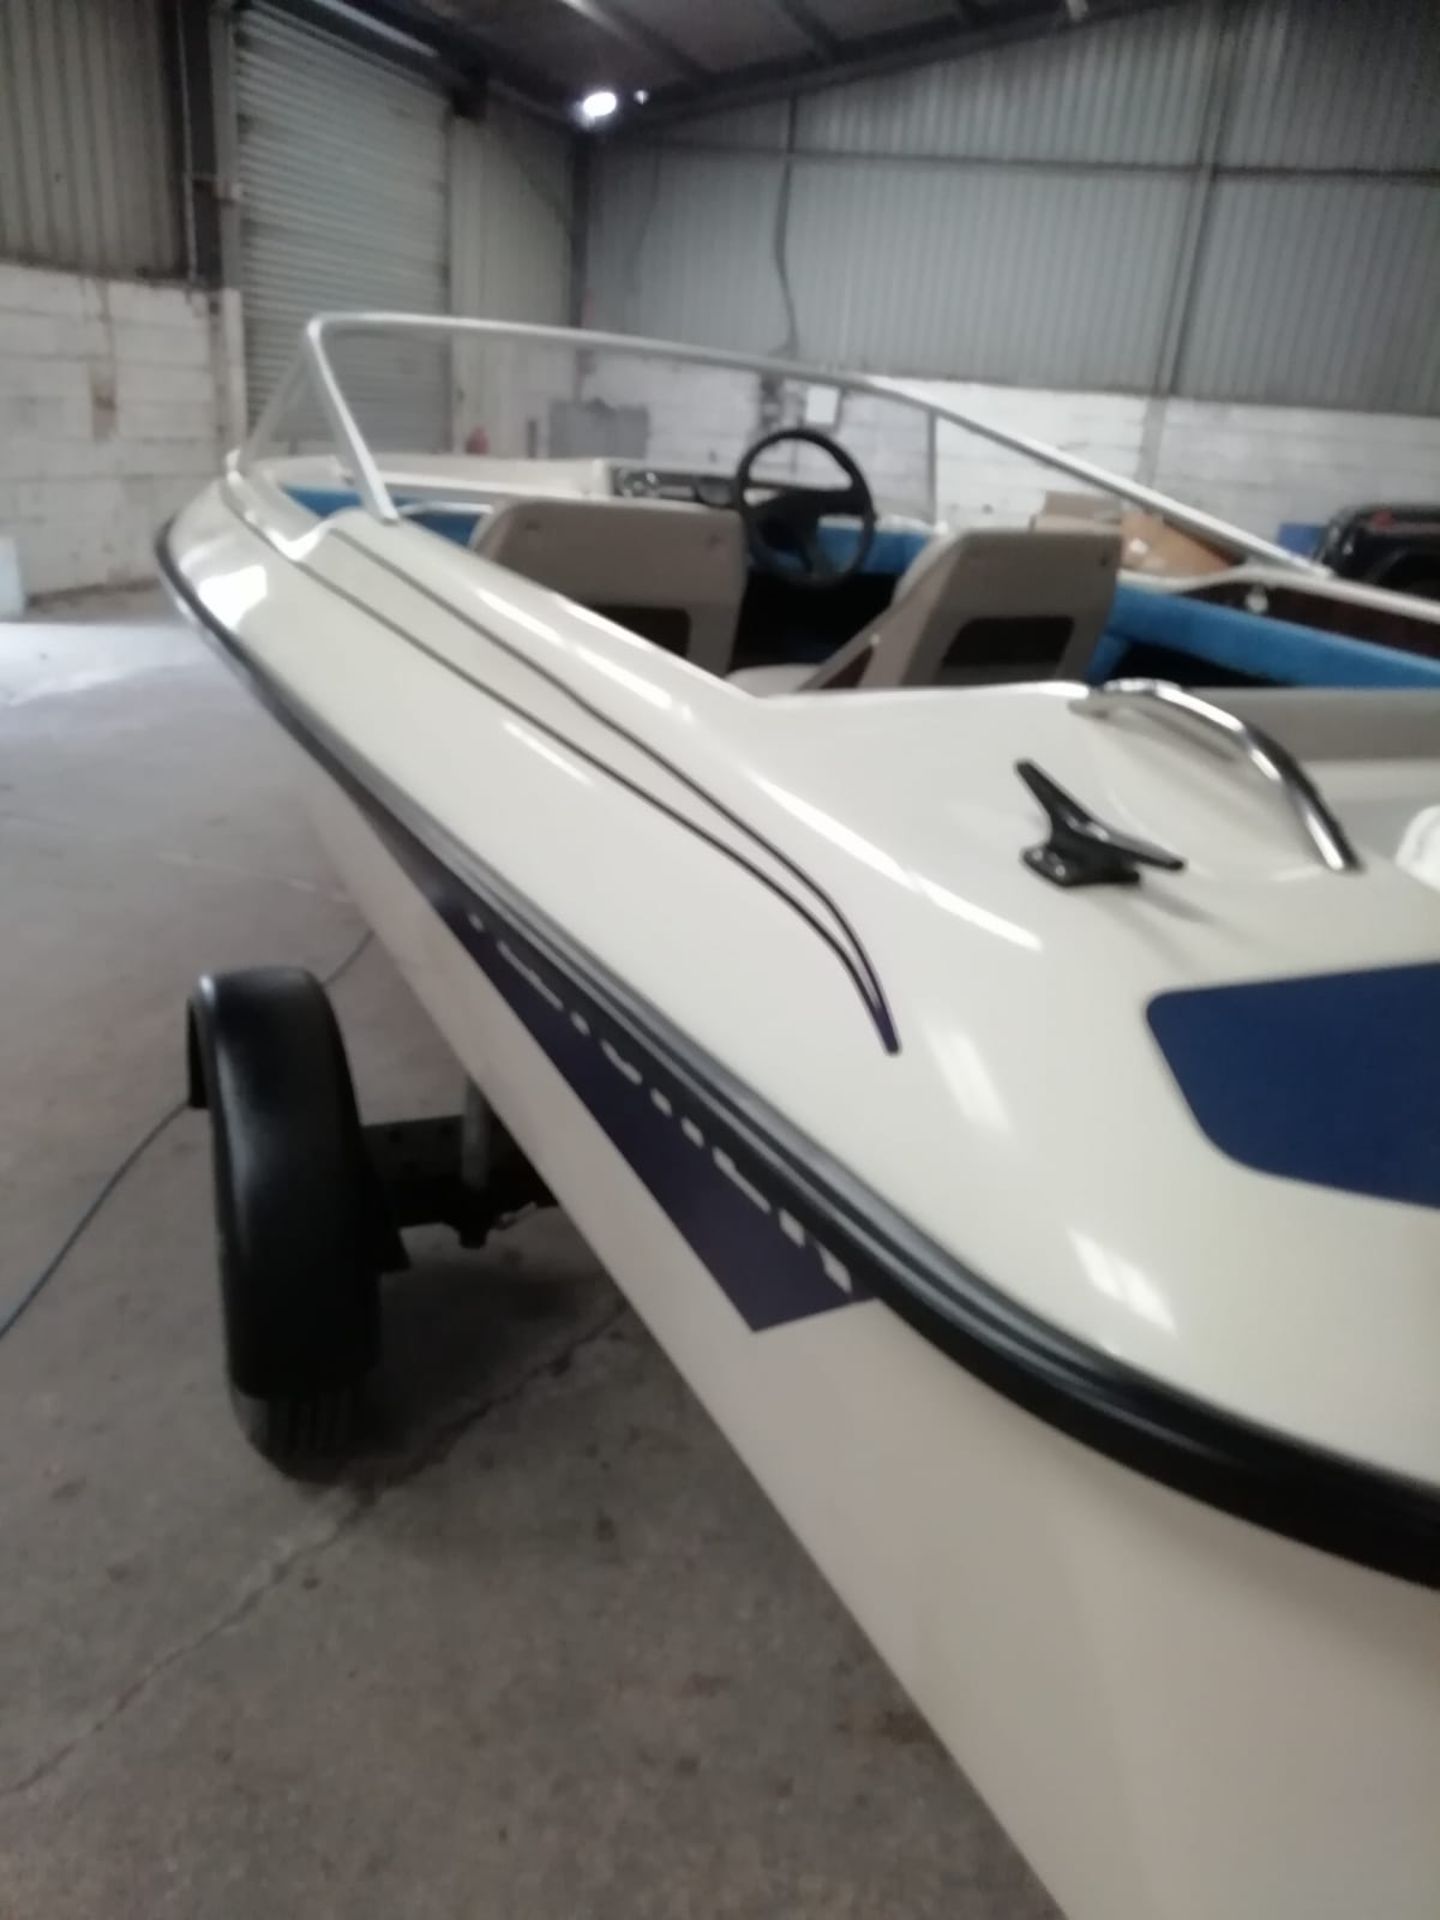 FLETCHER 150 ARROWSPORT SPEED BOAT WITH 85 HP YAMAHA ELECTRIC START - Image 10 of 11